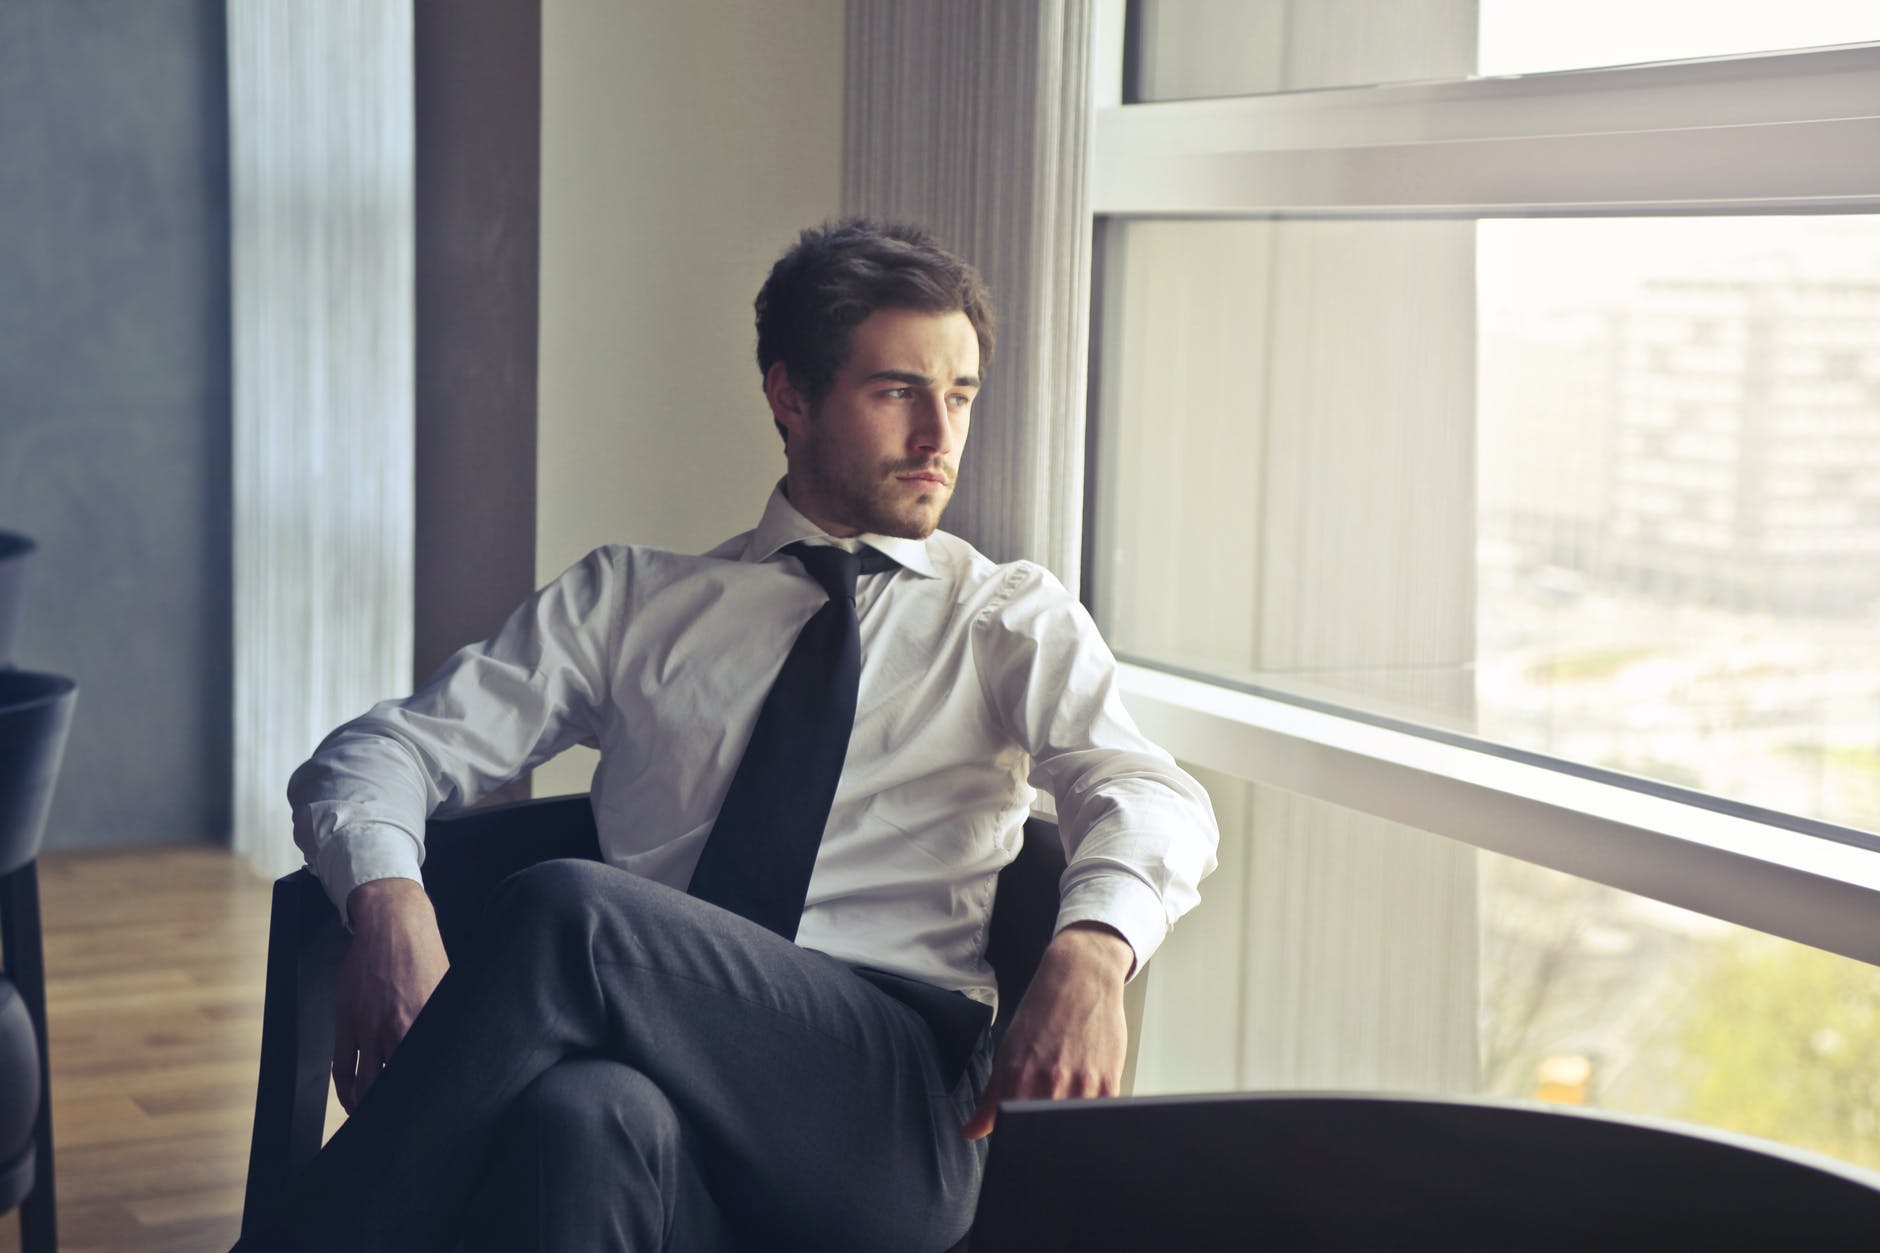 bored looking man in business attire staring out of an office window